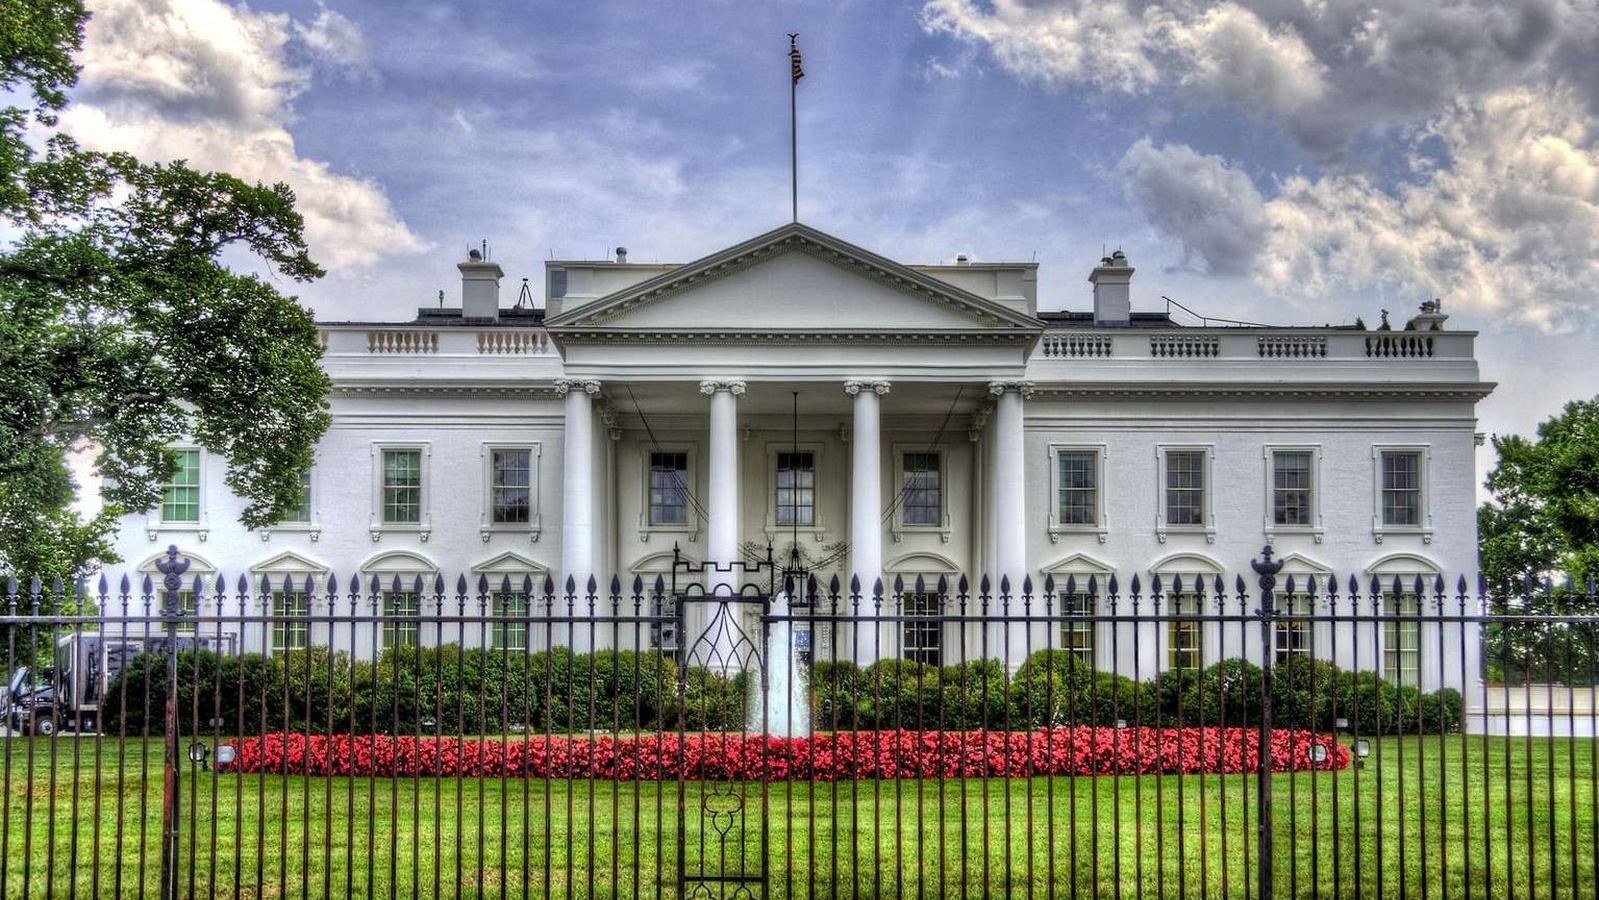 Driver dies after vehicle crashes into White House gate